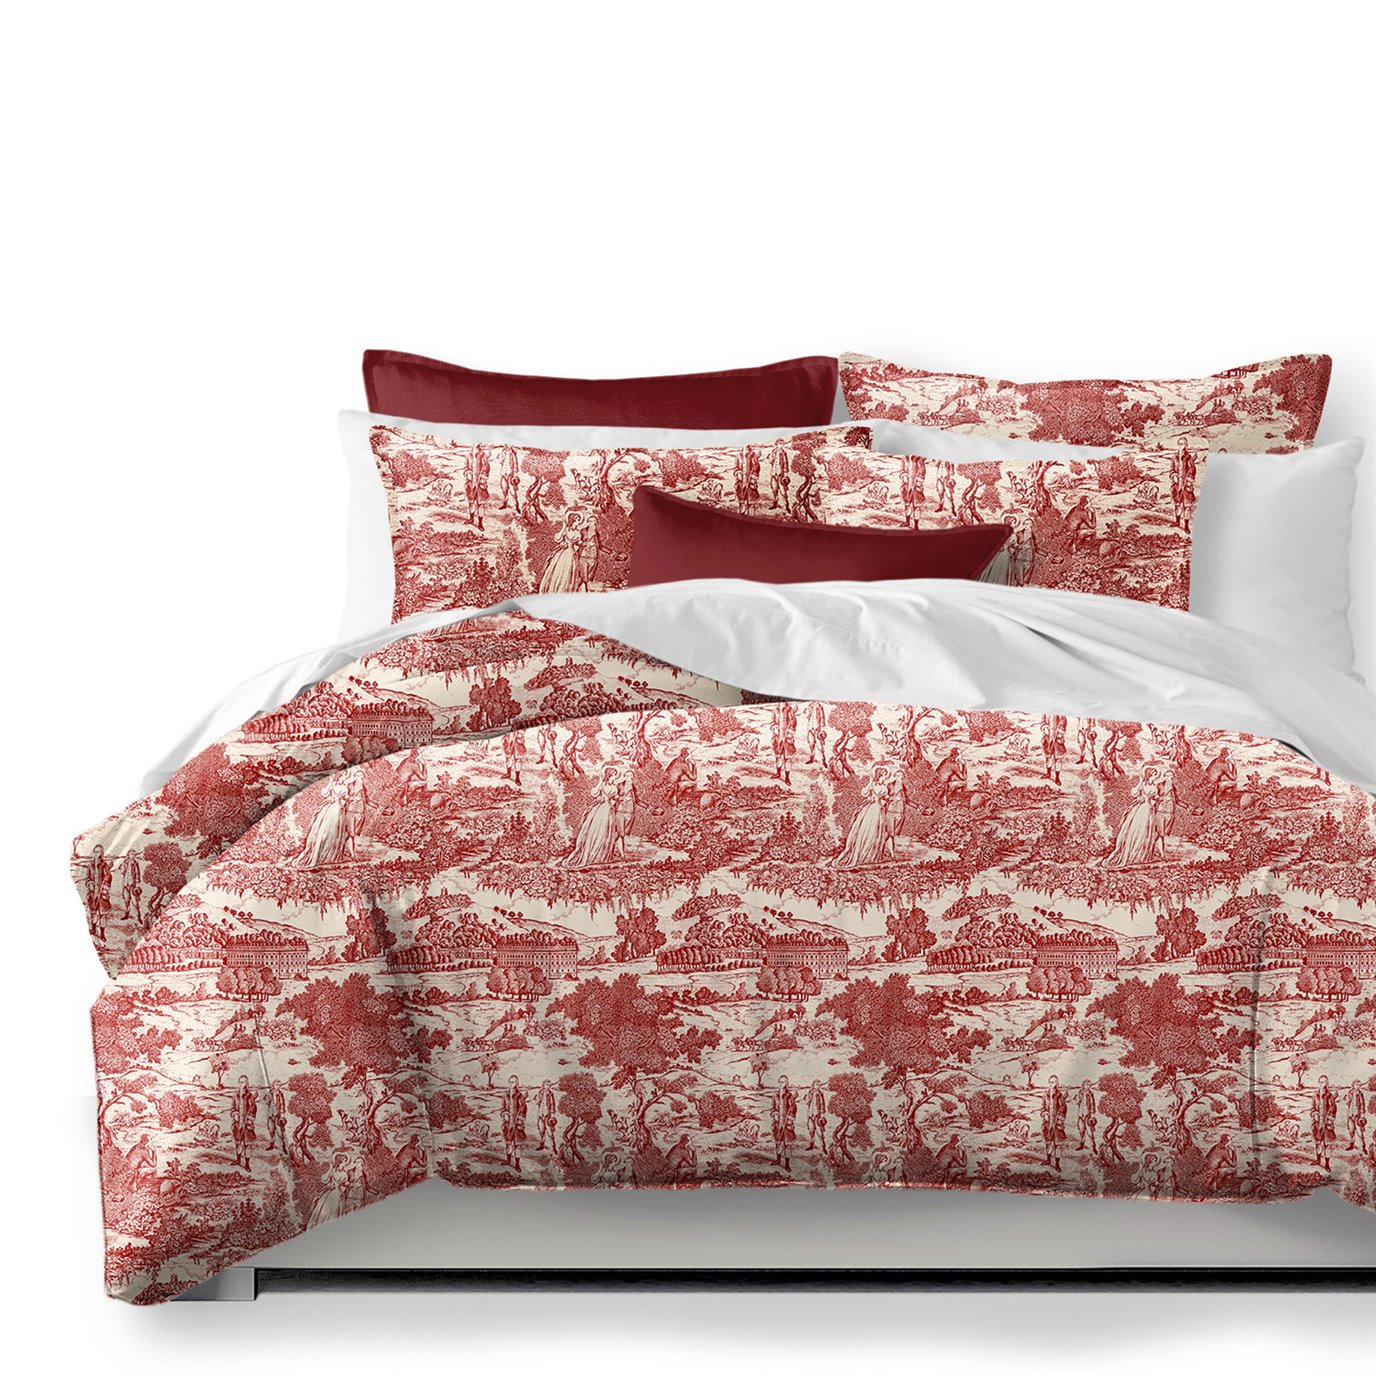 Beau Toile Red Duvet Cover and Pillow Sham(s) Set - Size Super Queen